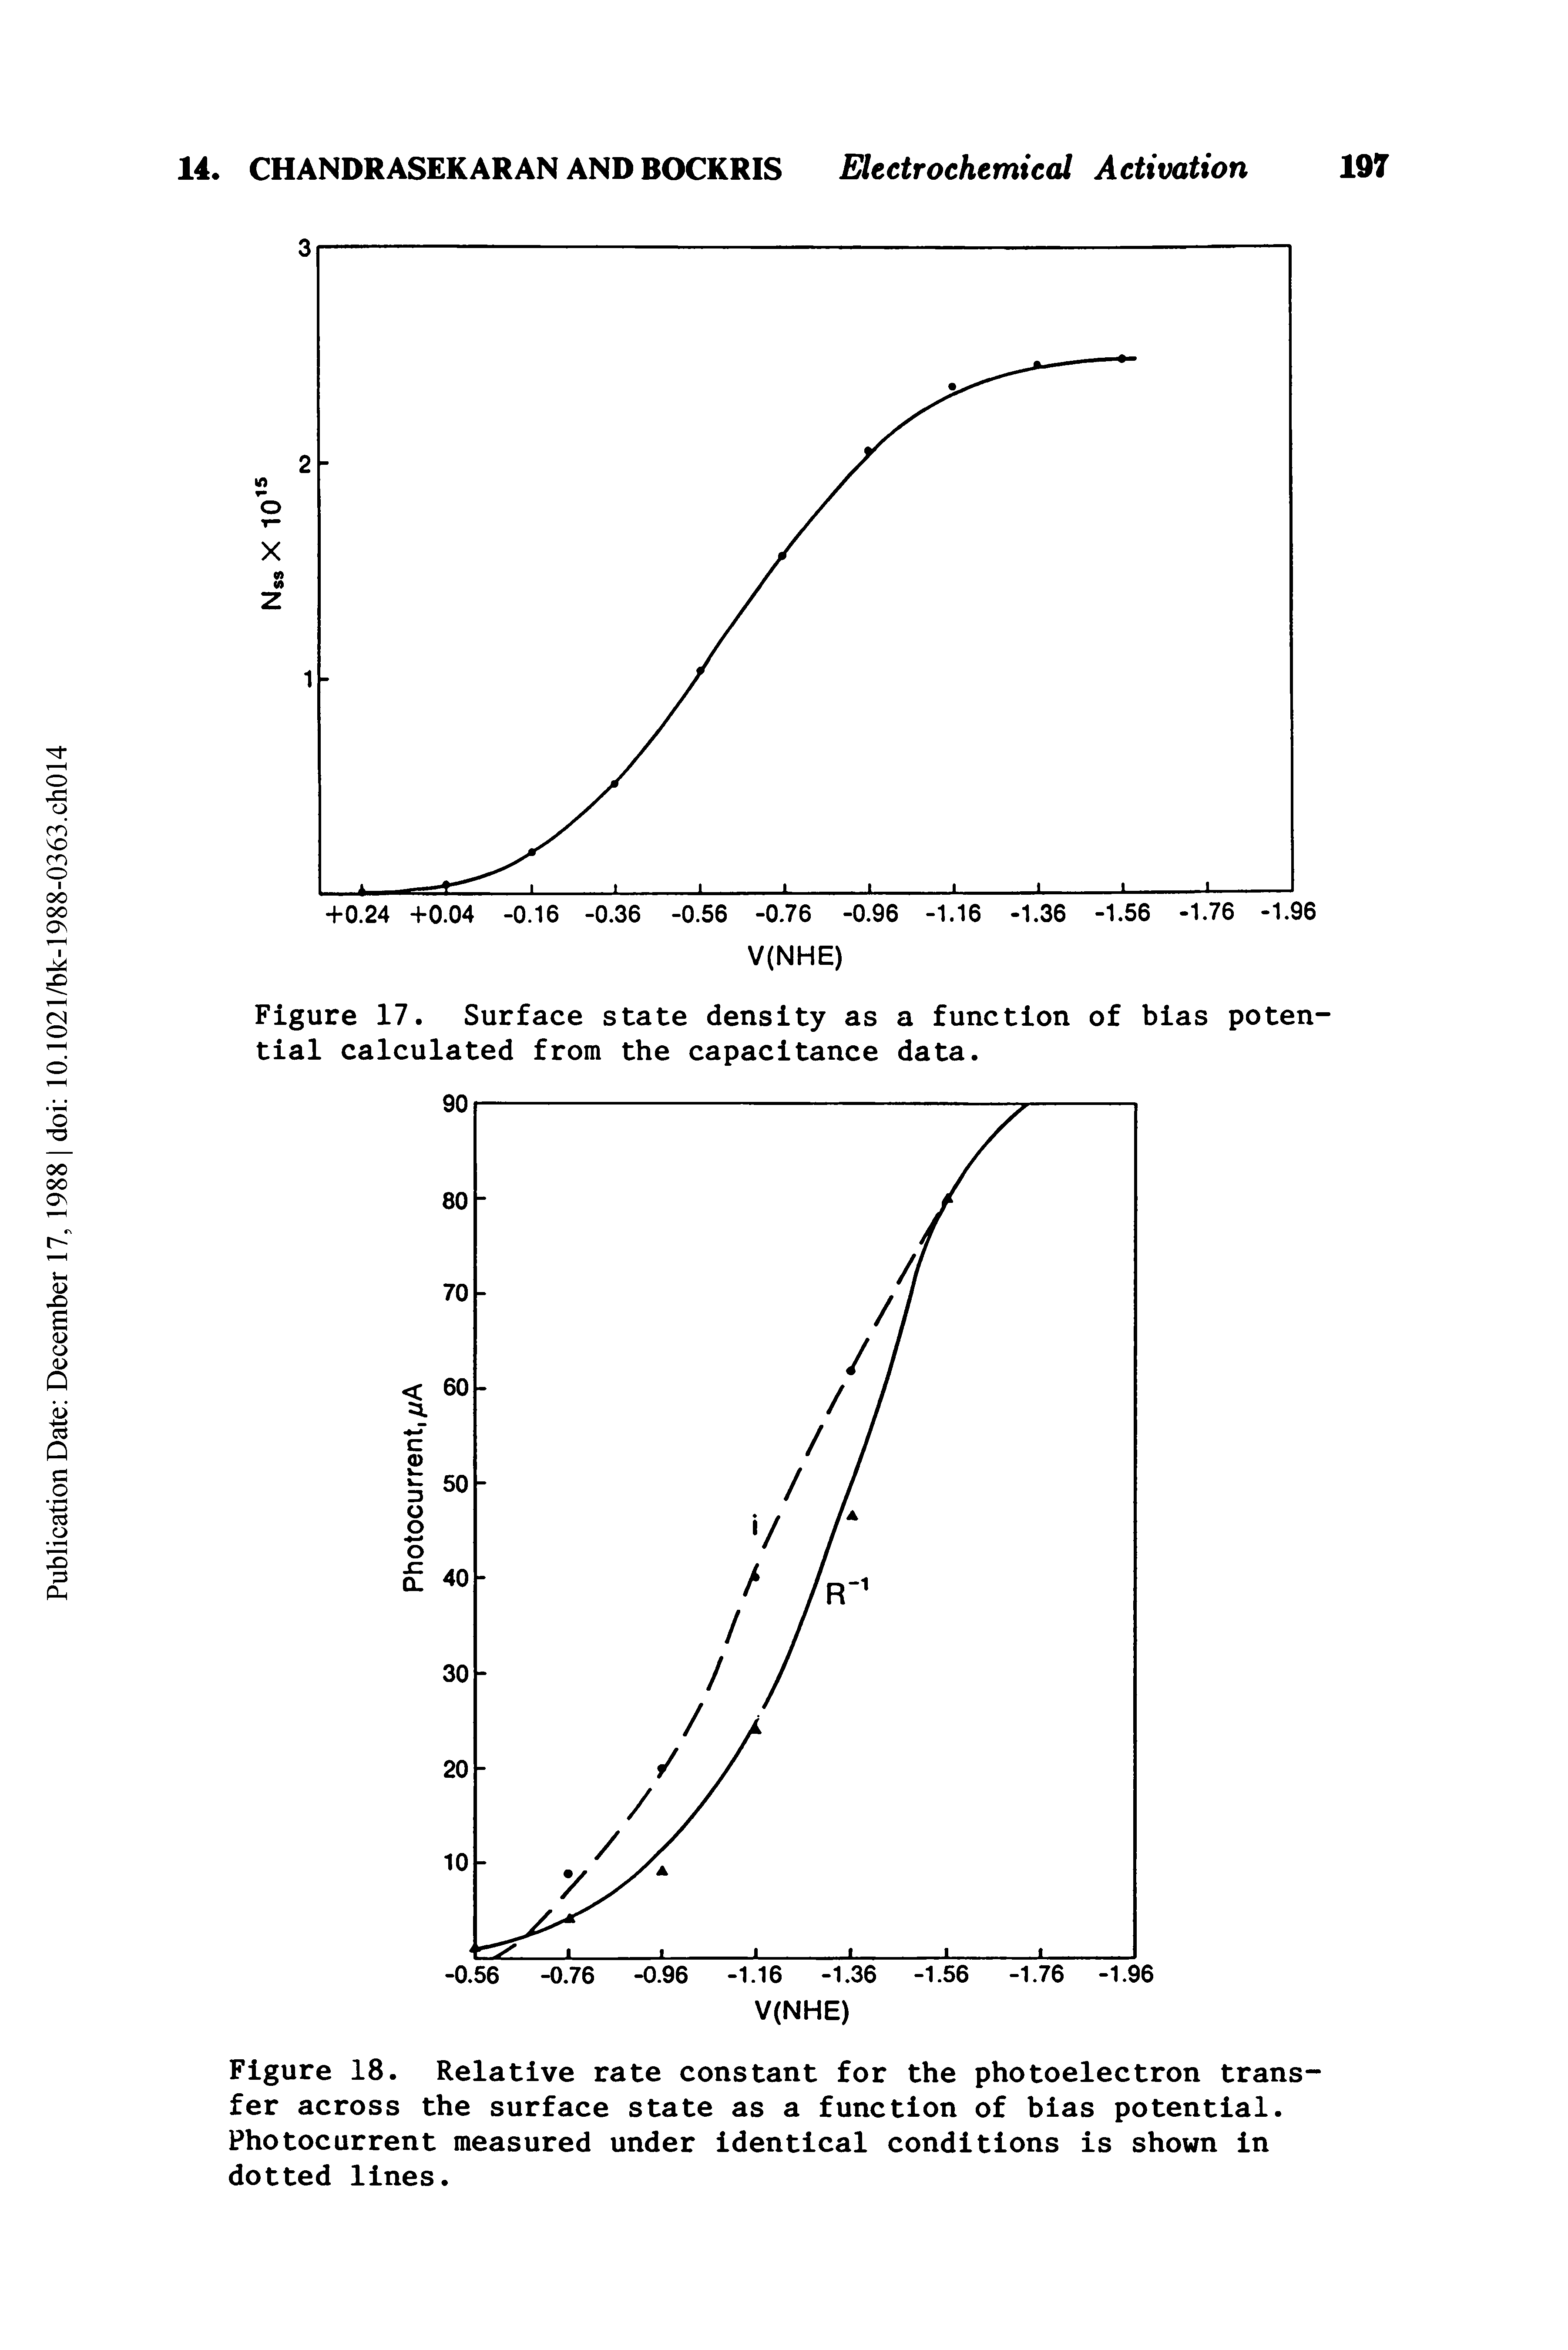 Figure 17. Surface state density as a function of bias potential calculated from the capacitance data.